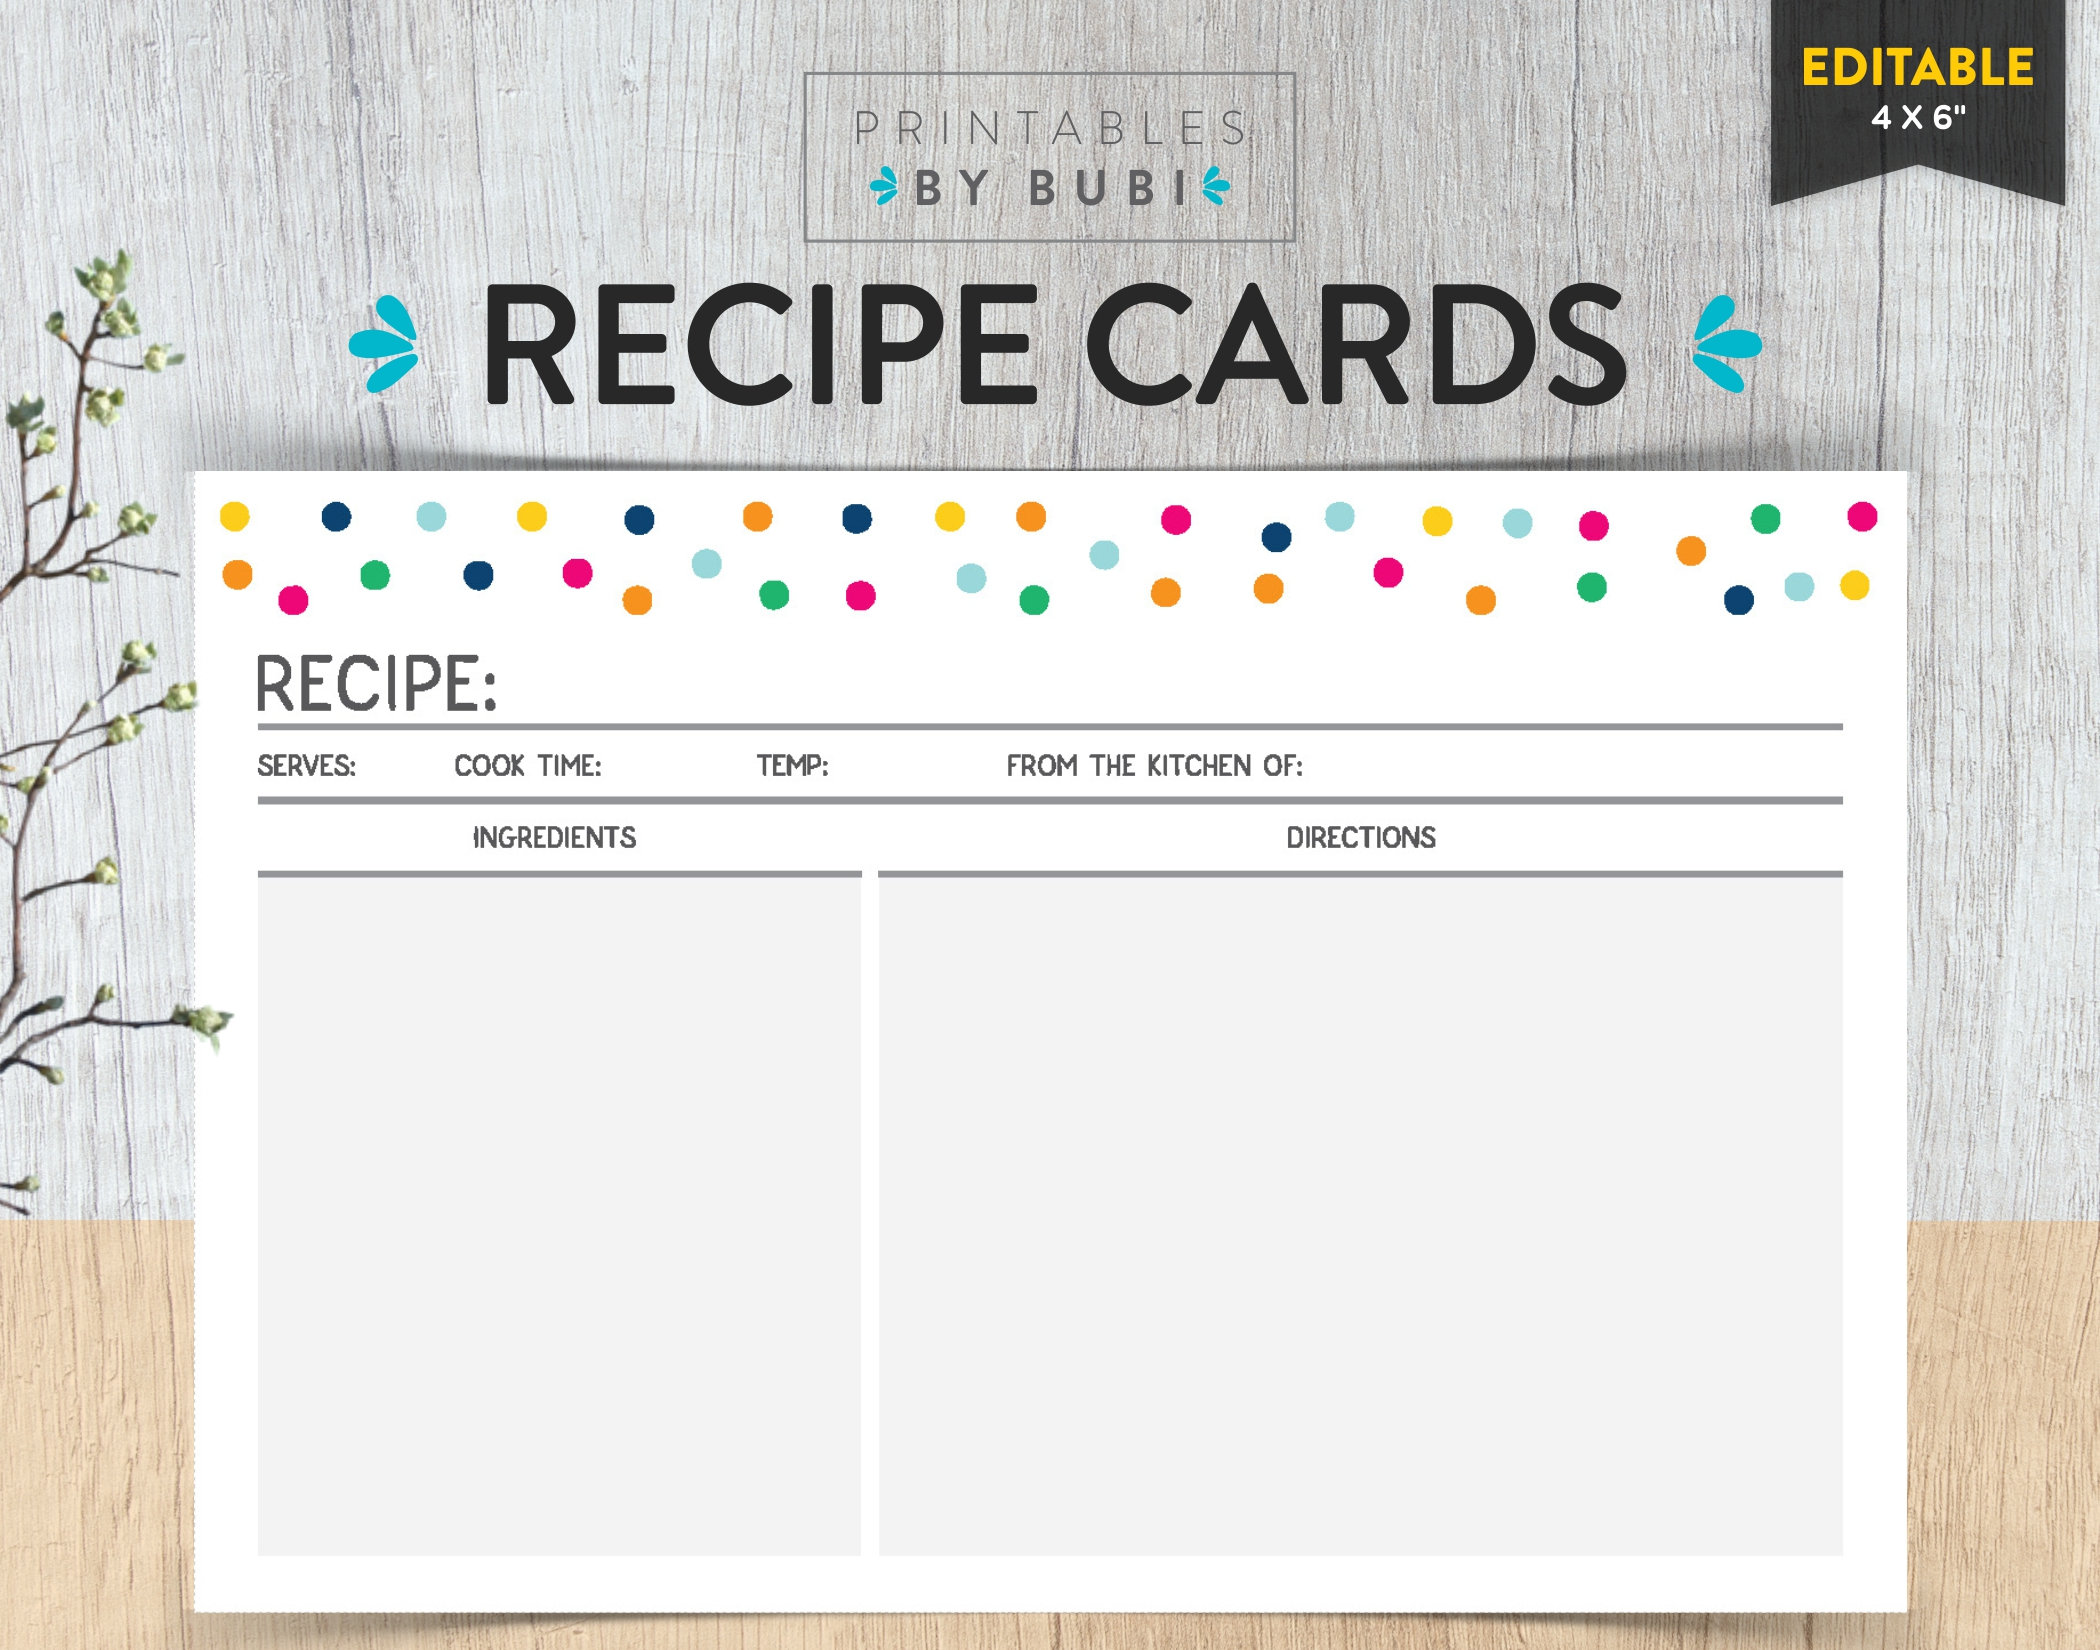 How To Print 4x6 Recipe Cards